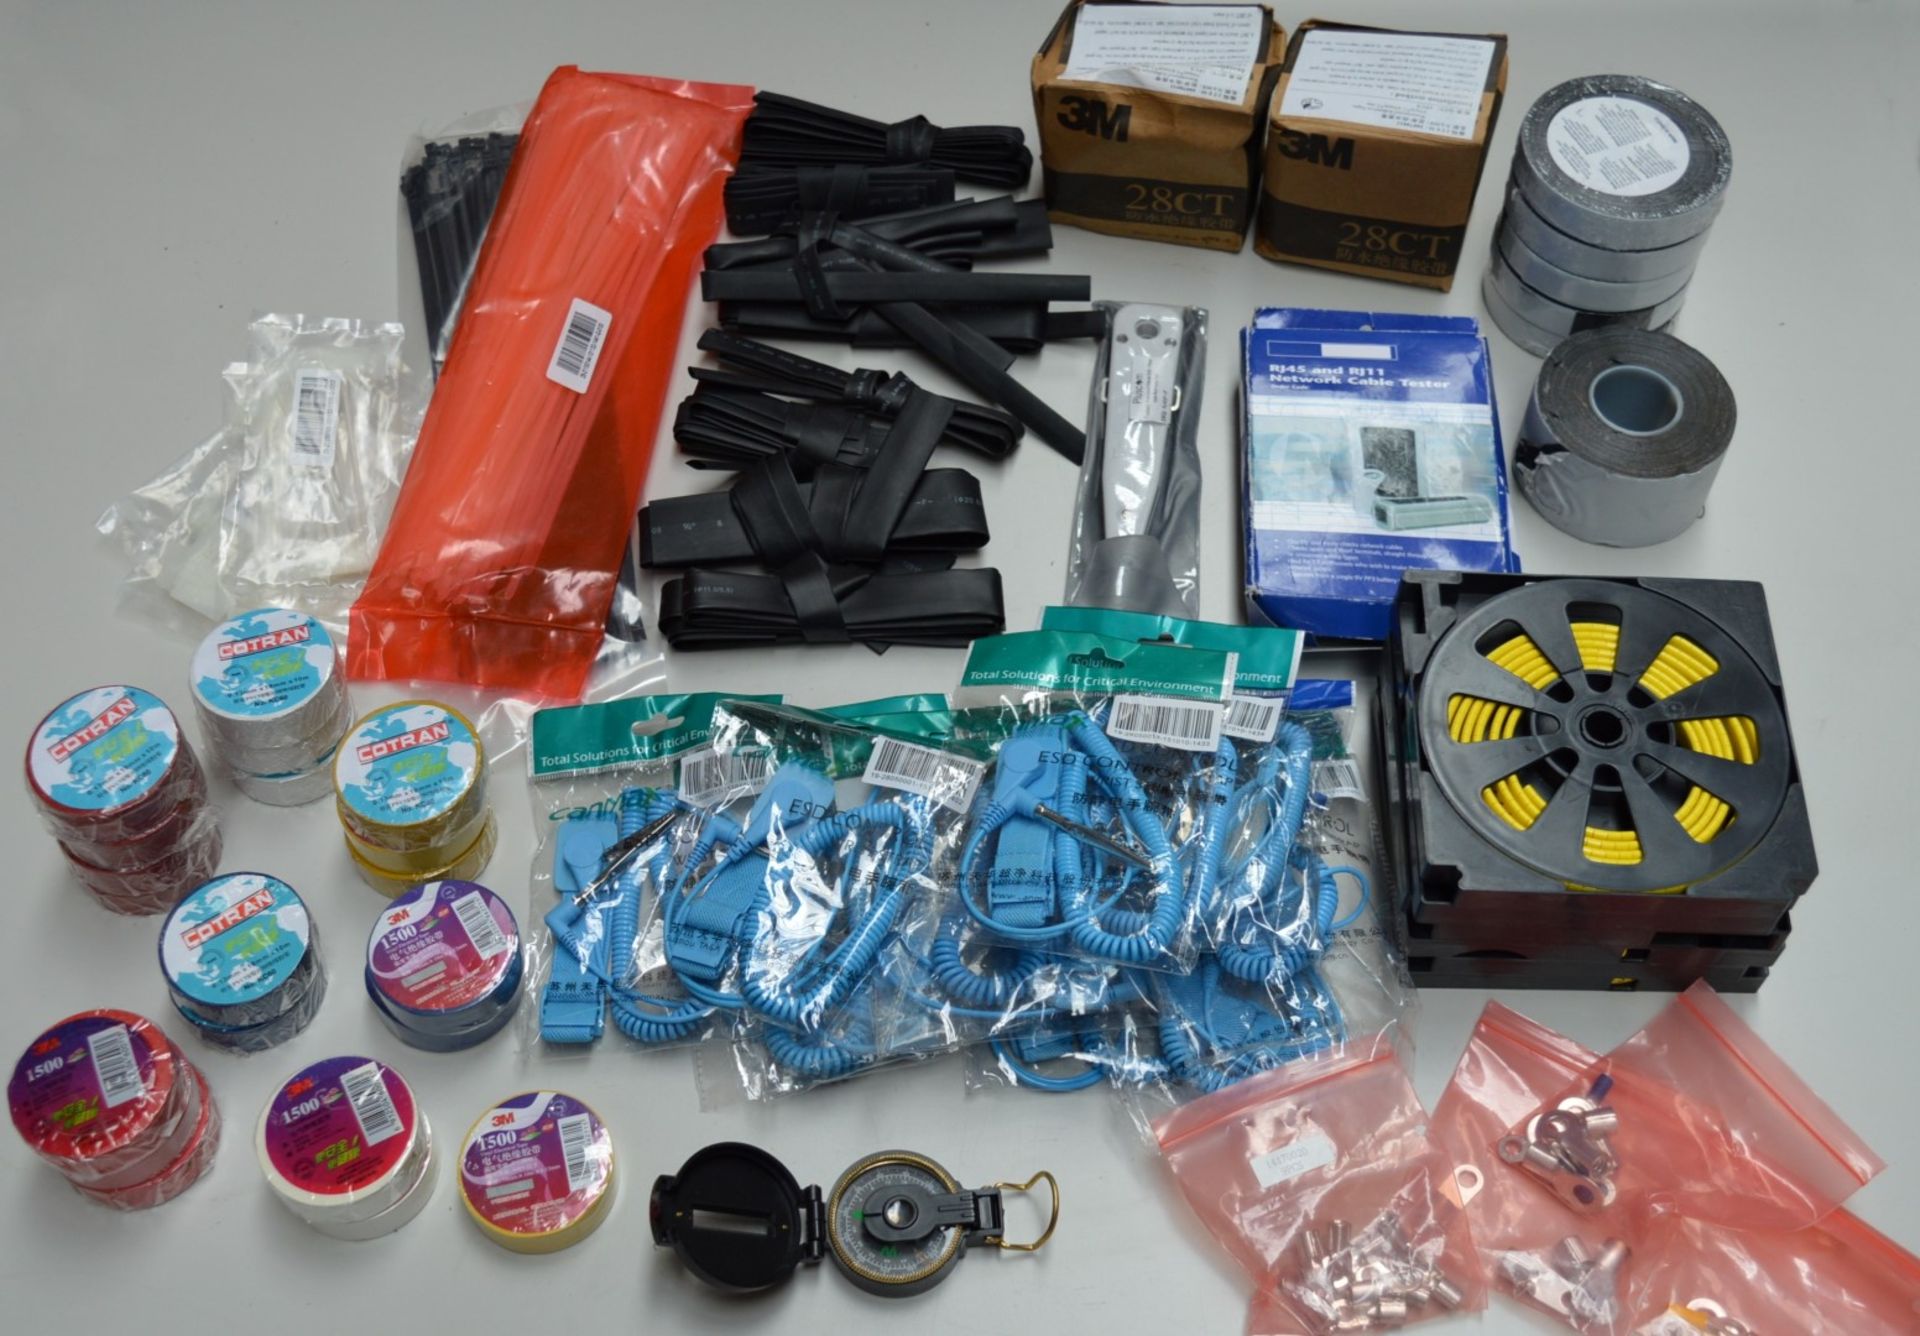 Assorted Collection of Electrical Consumables - CL300 - Includes 20 x Rolls of PVC Electrical Tape,